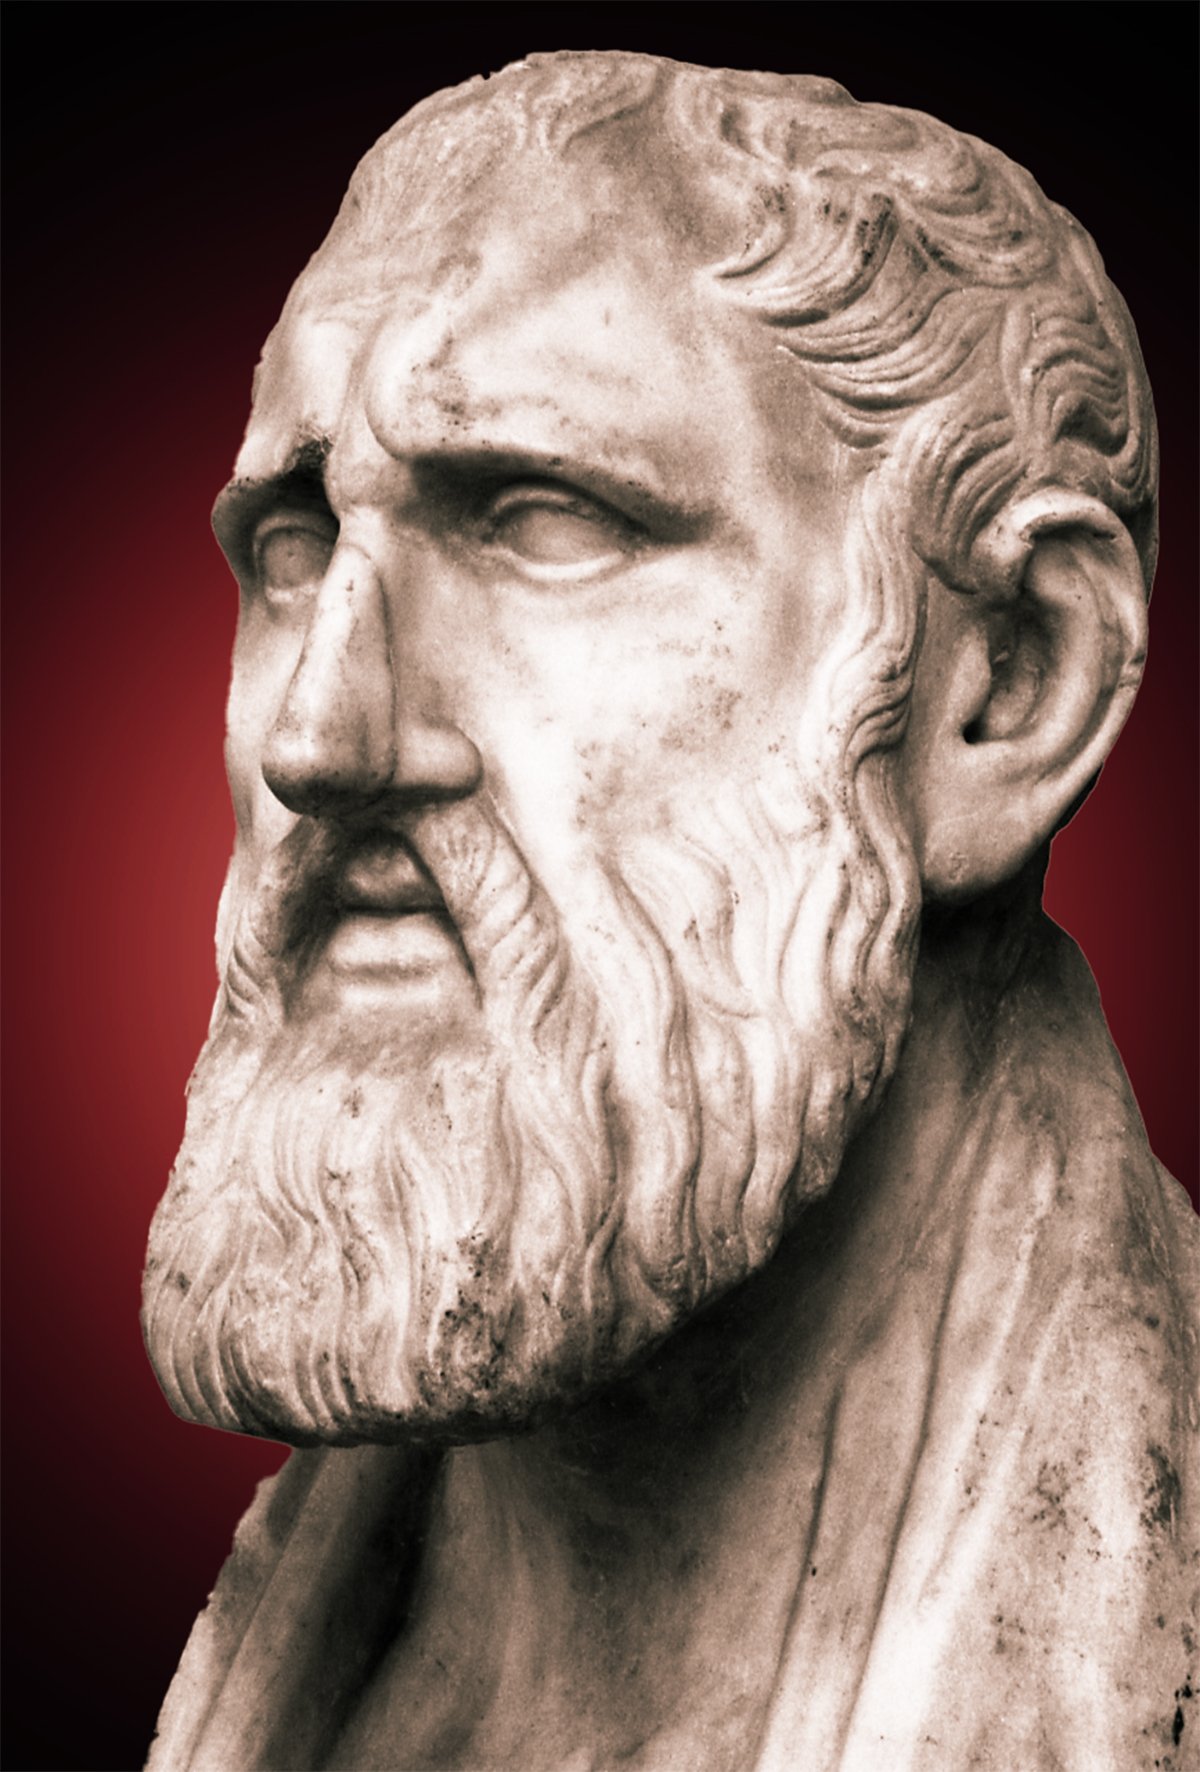 Bust of a stern-looking bearded man, Greek Philosopher Zeno, with deep-set eyes and a prominent brow. The sculpture shows fine details in the hair and beard, suggesting a figure of wisdom or contemplation. The bust is set against a red background that fades into shadows at the edges, drawing focus to the facial features.